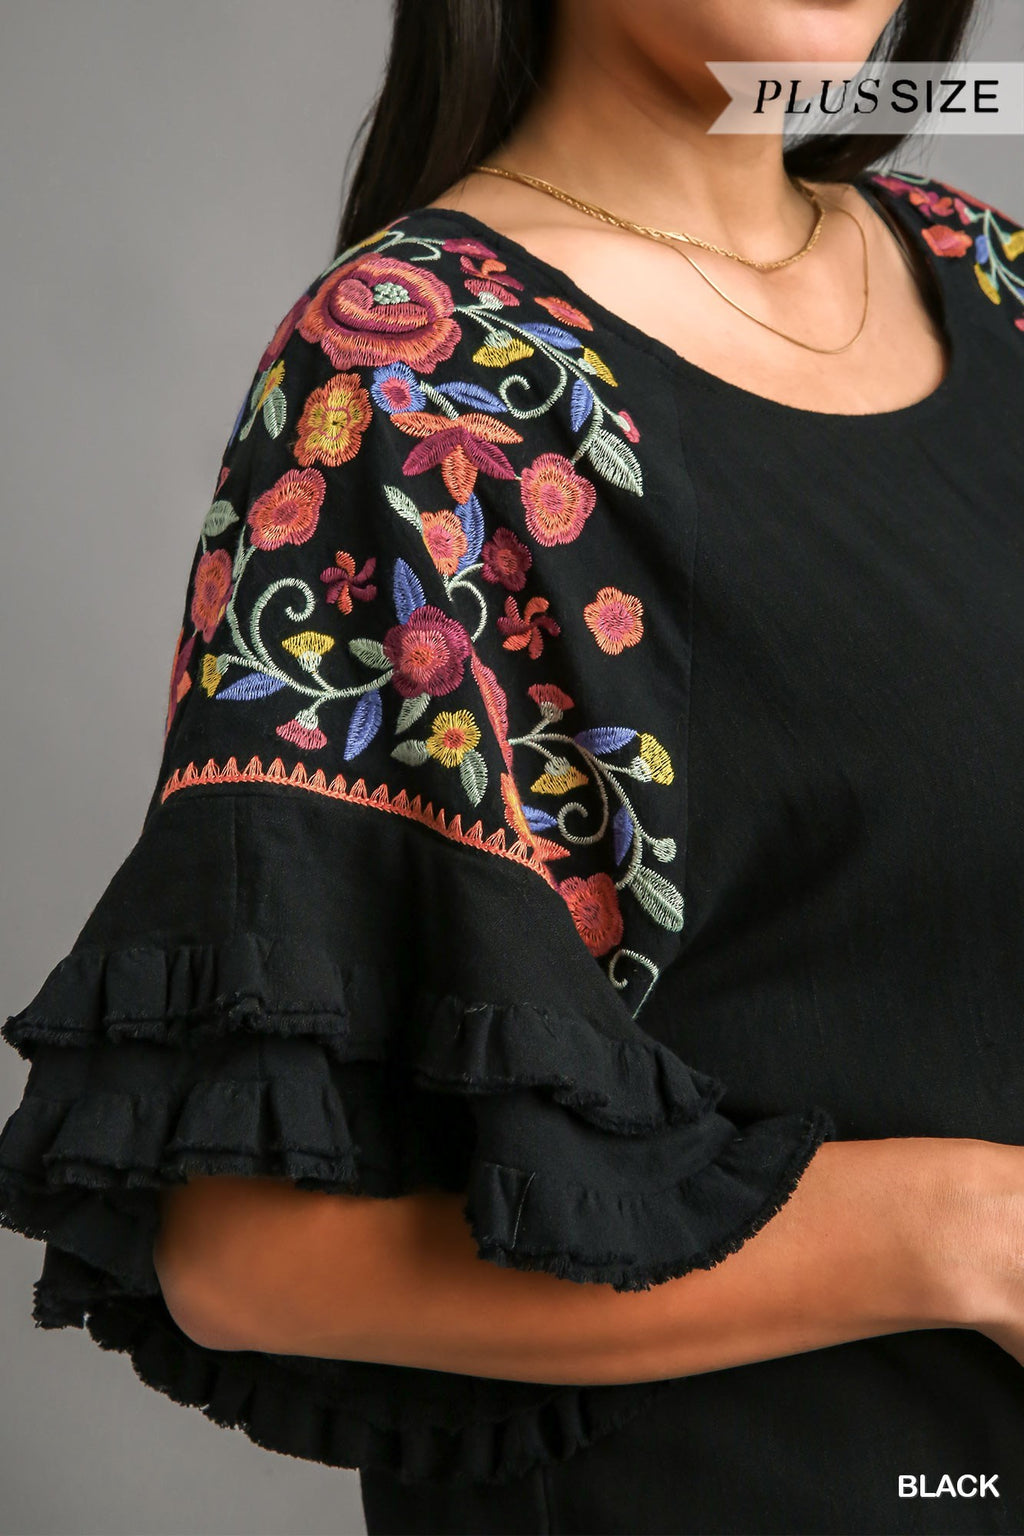 "Lucy" Embroidered Line Blend Blouse, Plus - The Katie Grace Boutique